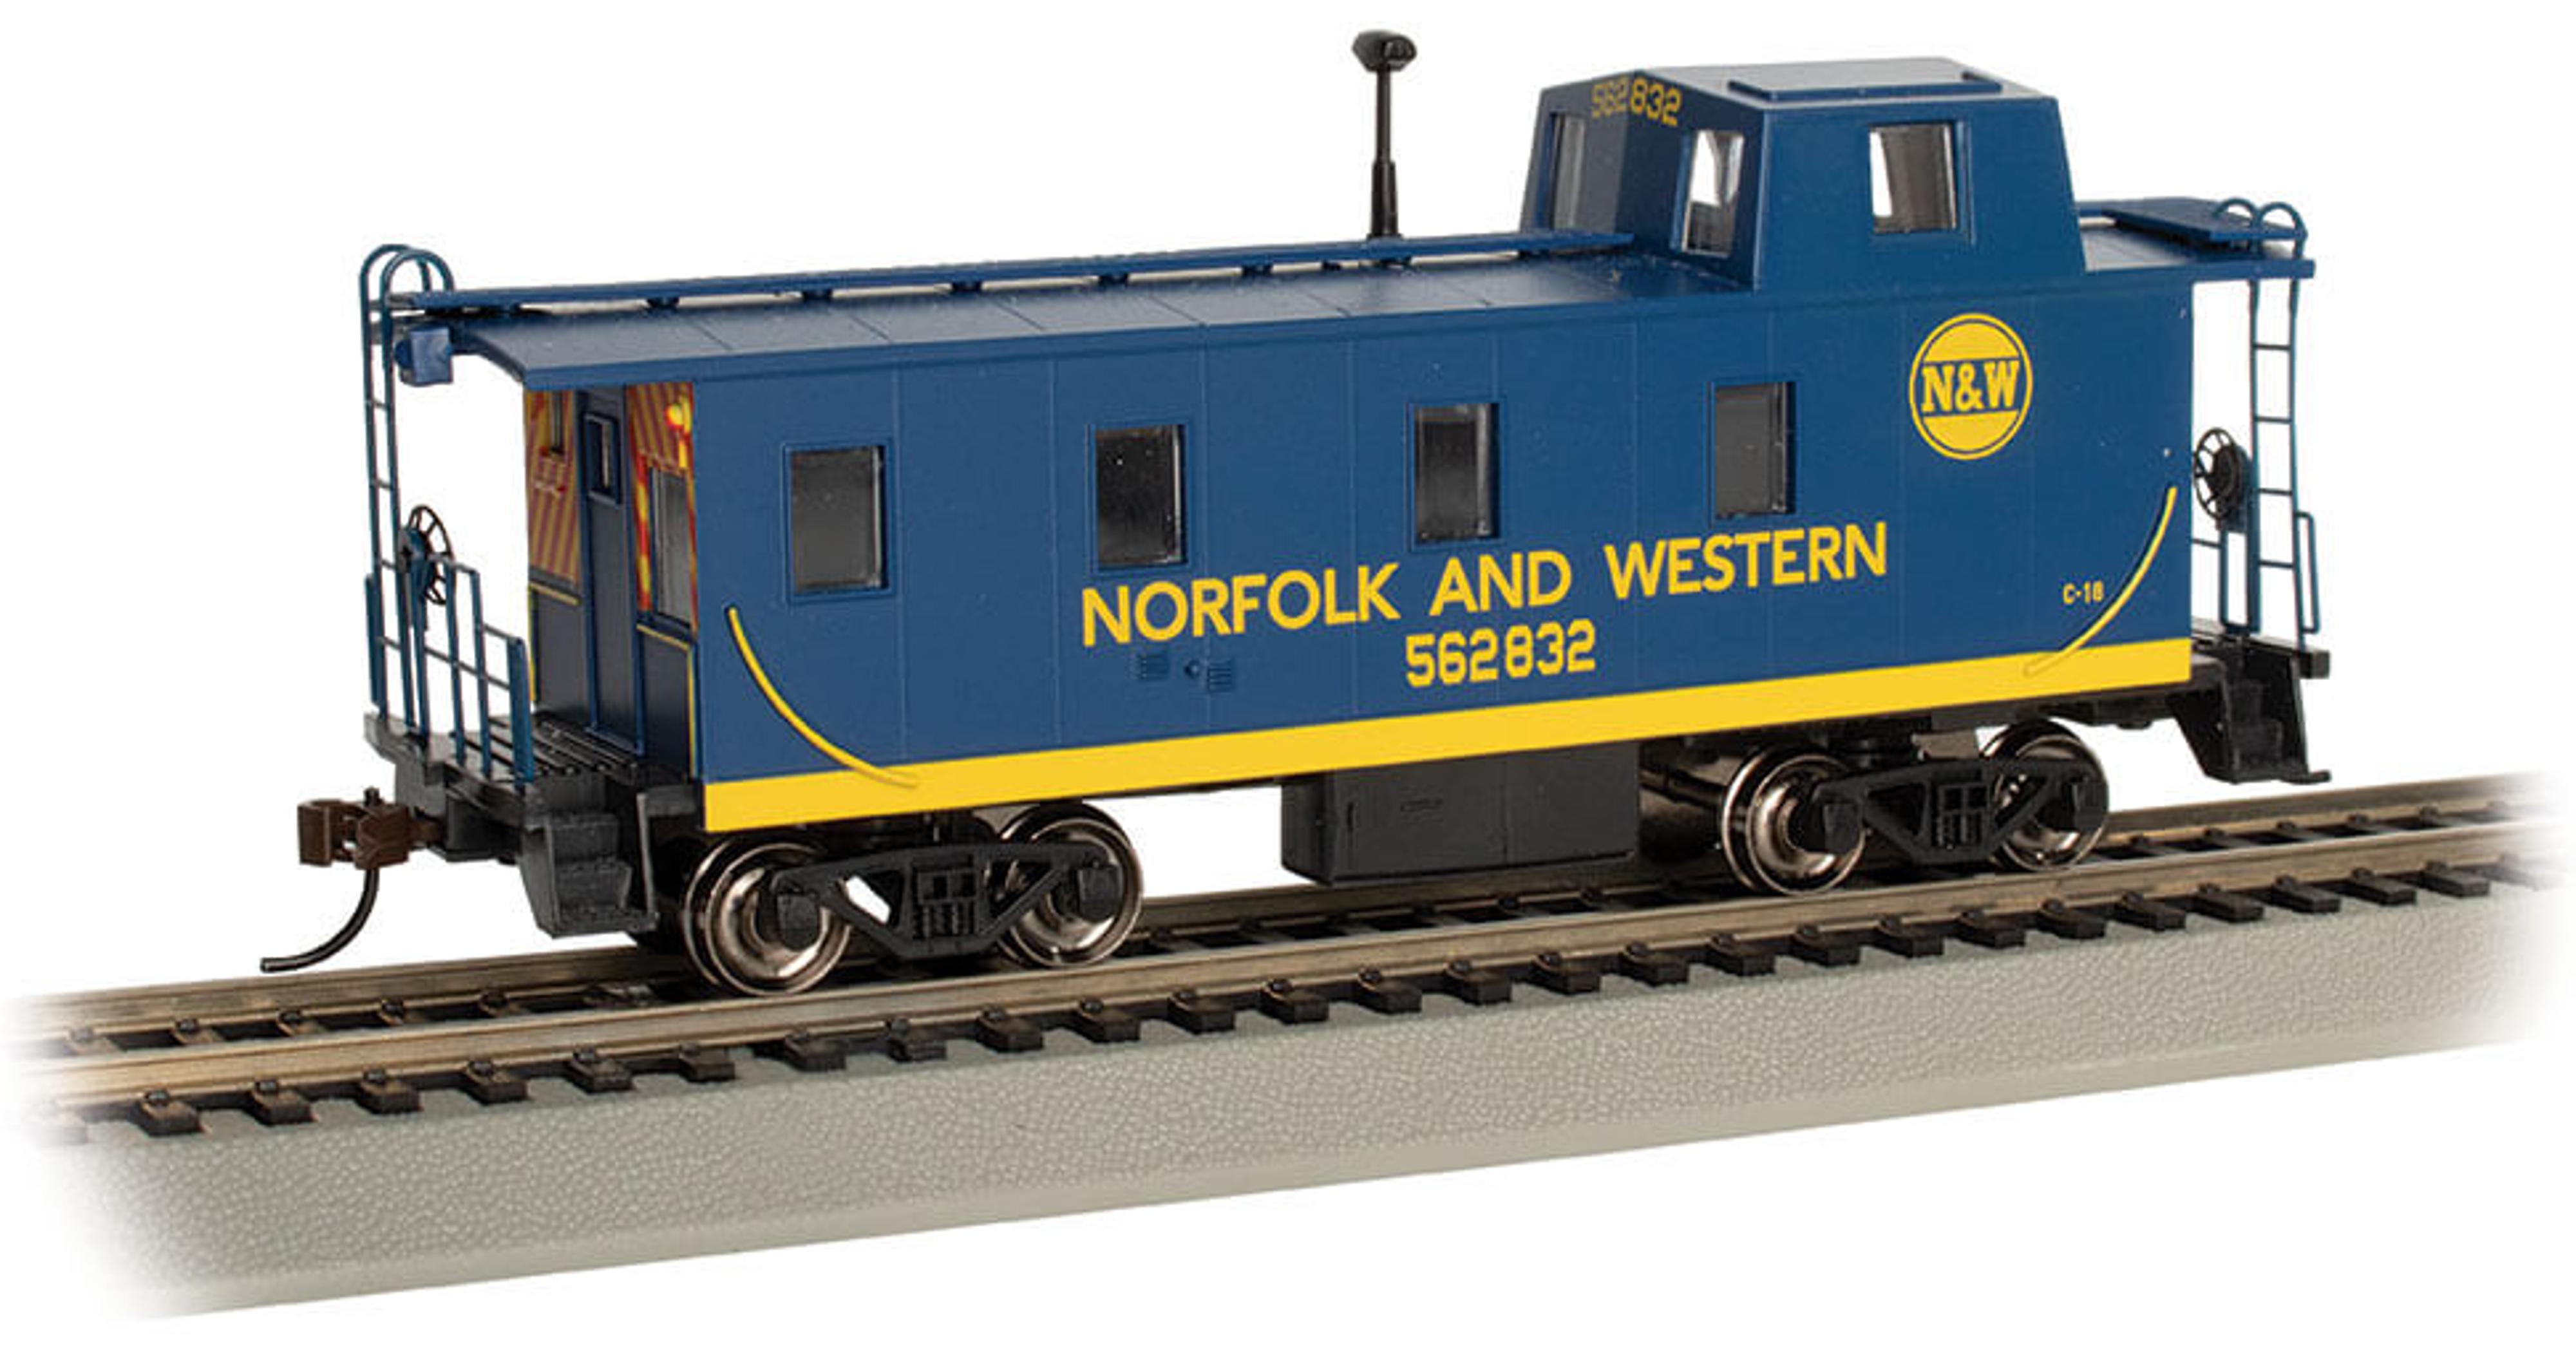 HO Streamlined Caboose with Offset Cupola - Norfolk and Western #562832